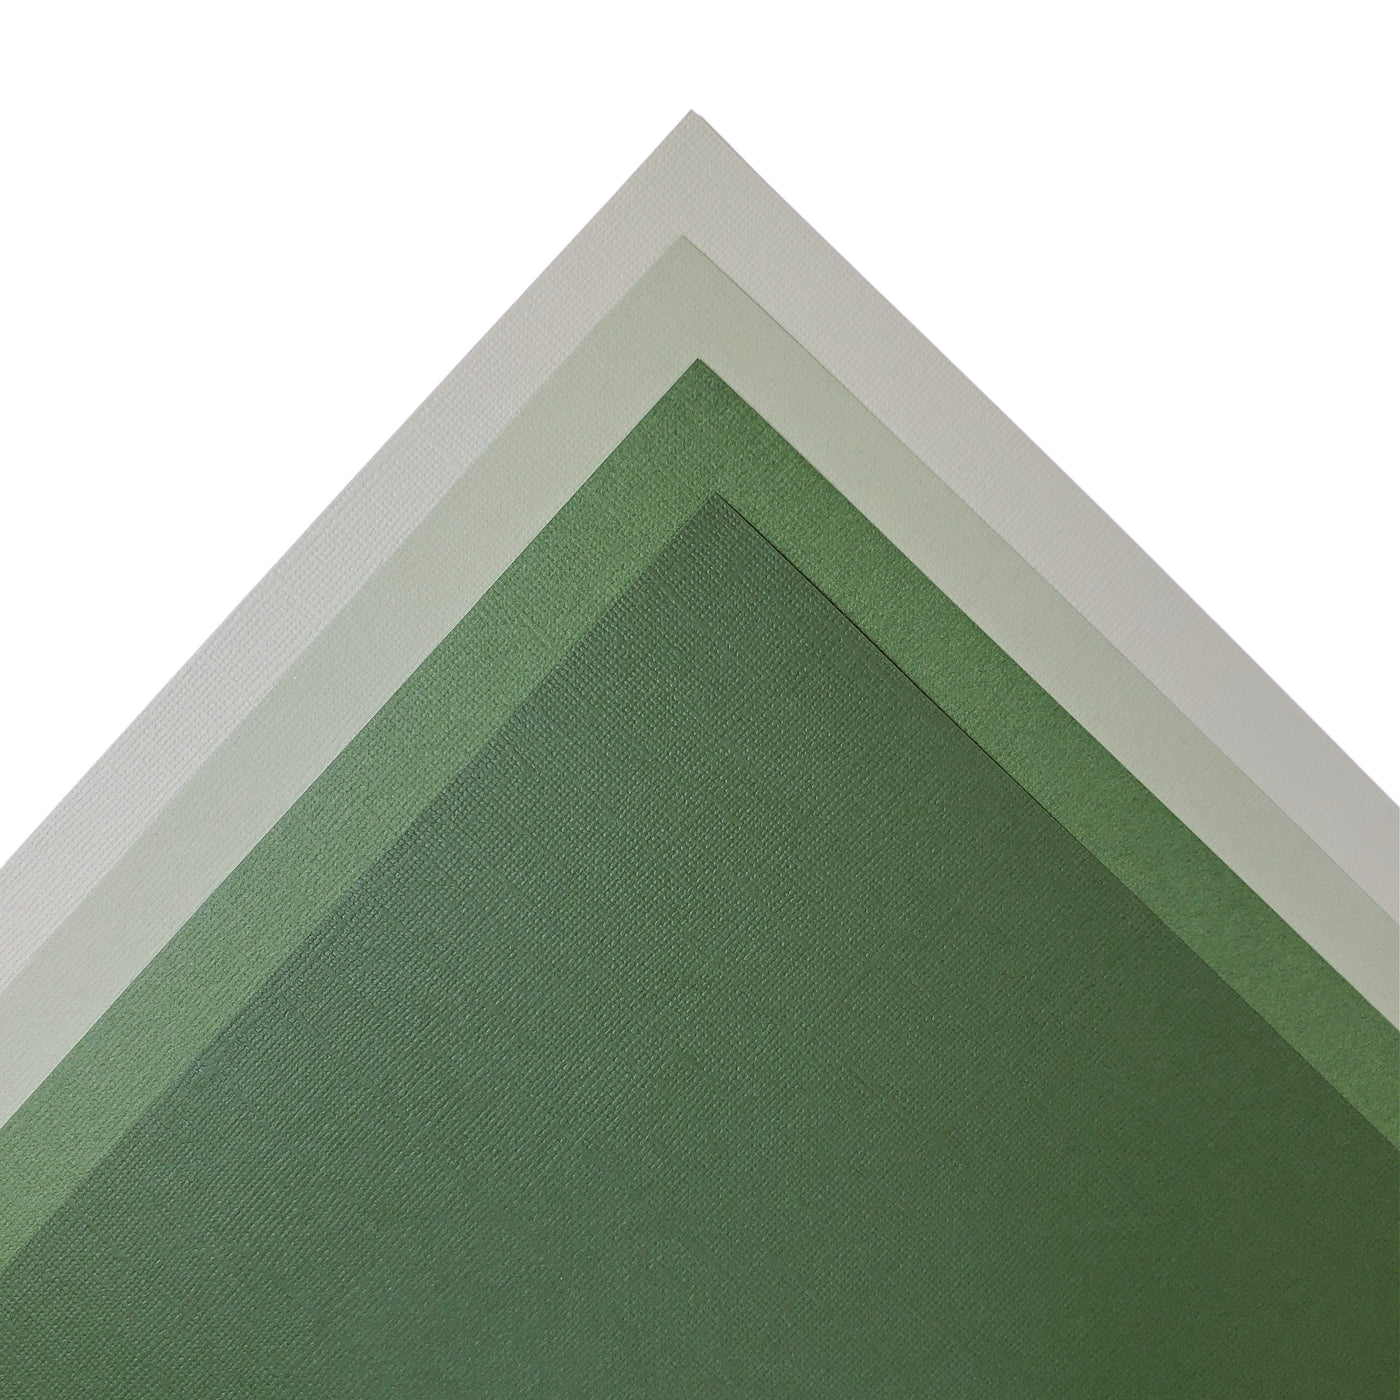 The Dark Green monochromatic assortment includes three (3) each of four (4) shades of green colors of Bazzill textured cardstock.